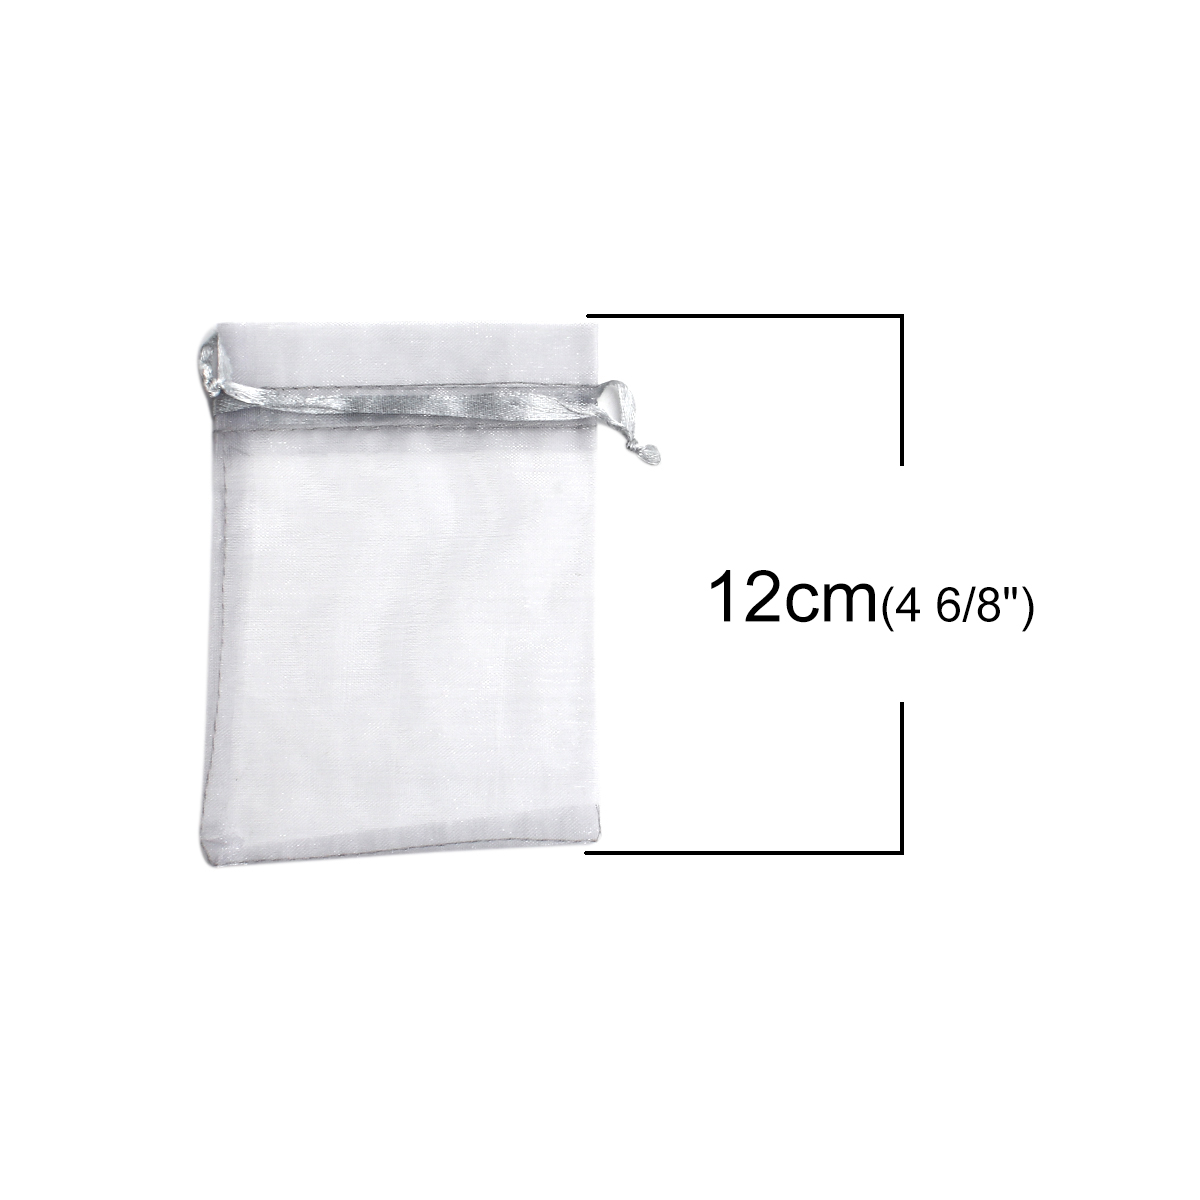 Picture of Wedding Gift Organza Jewelry Bags Drawstring Rectangle Gray (Usable Space: 9.5x9cm) 12cm(4 6/8") x 9cm(3 4/8"), 50 PCs